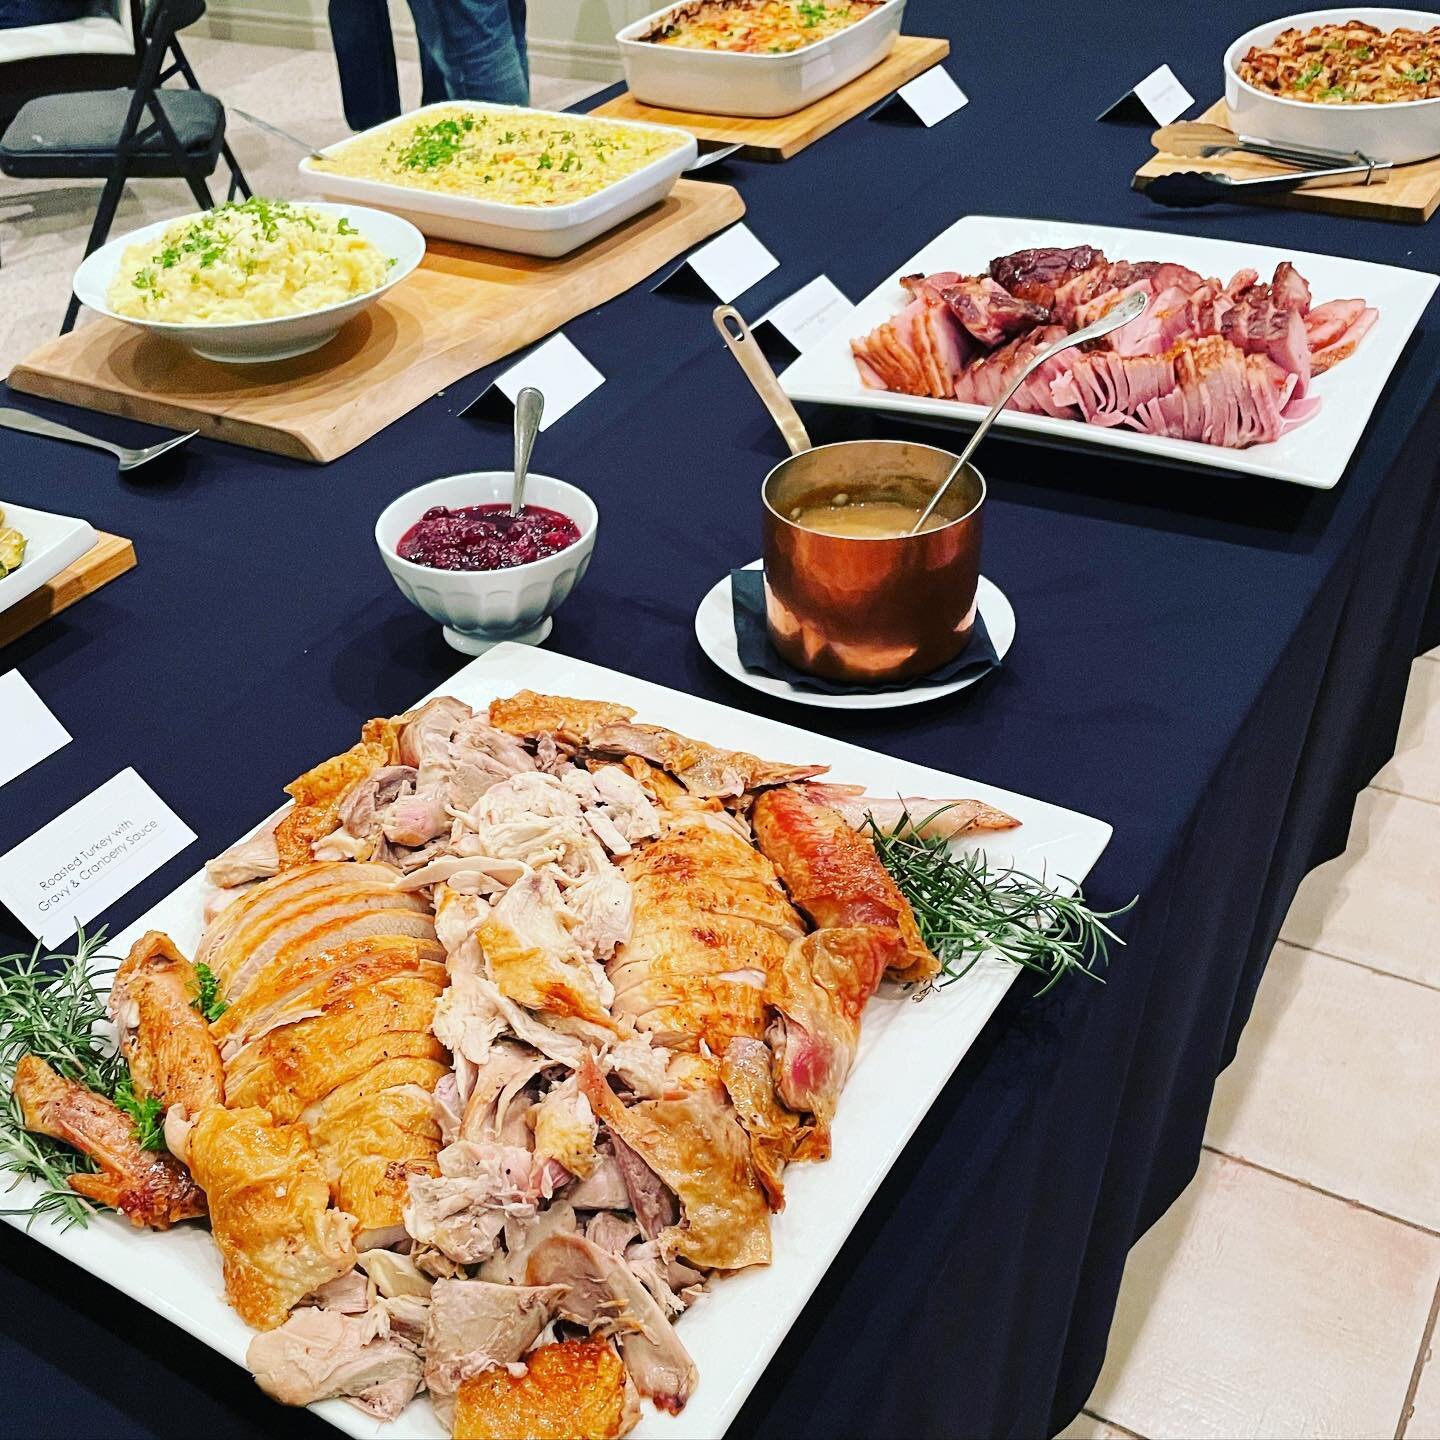 Traditional holiday buffet with a few twists. #yegcatering #yegfood #turkey